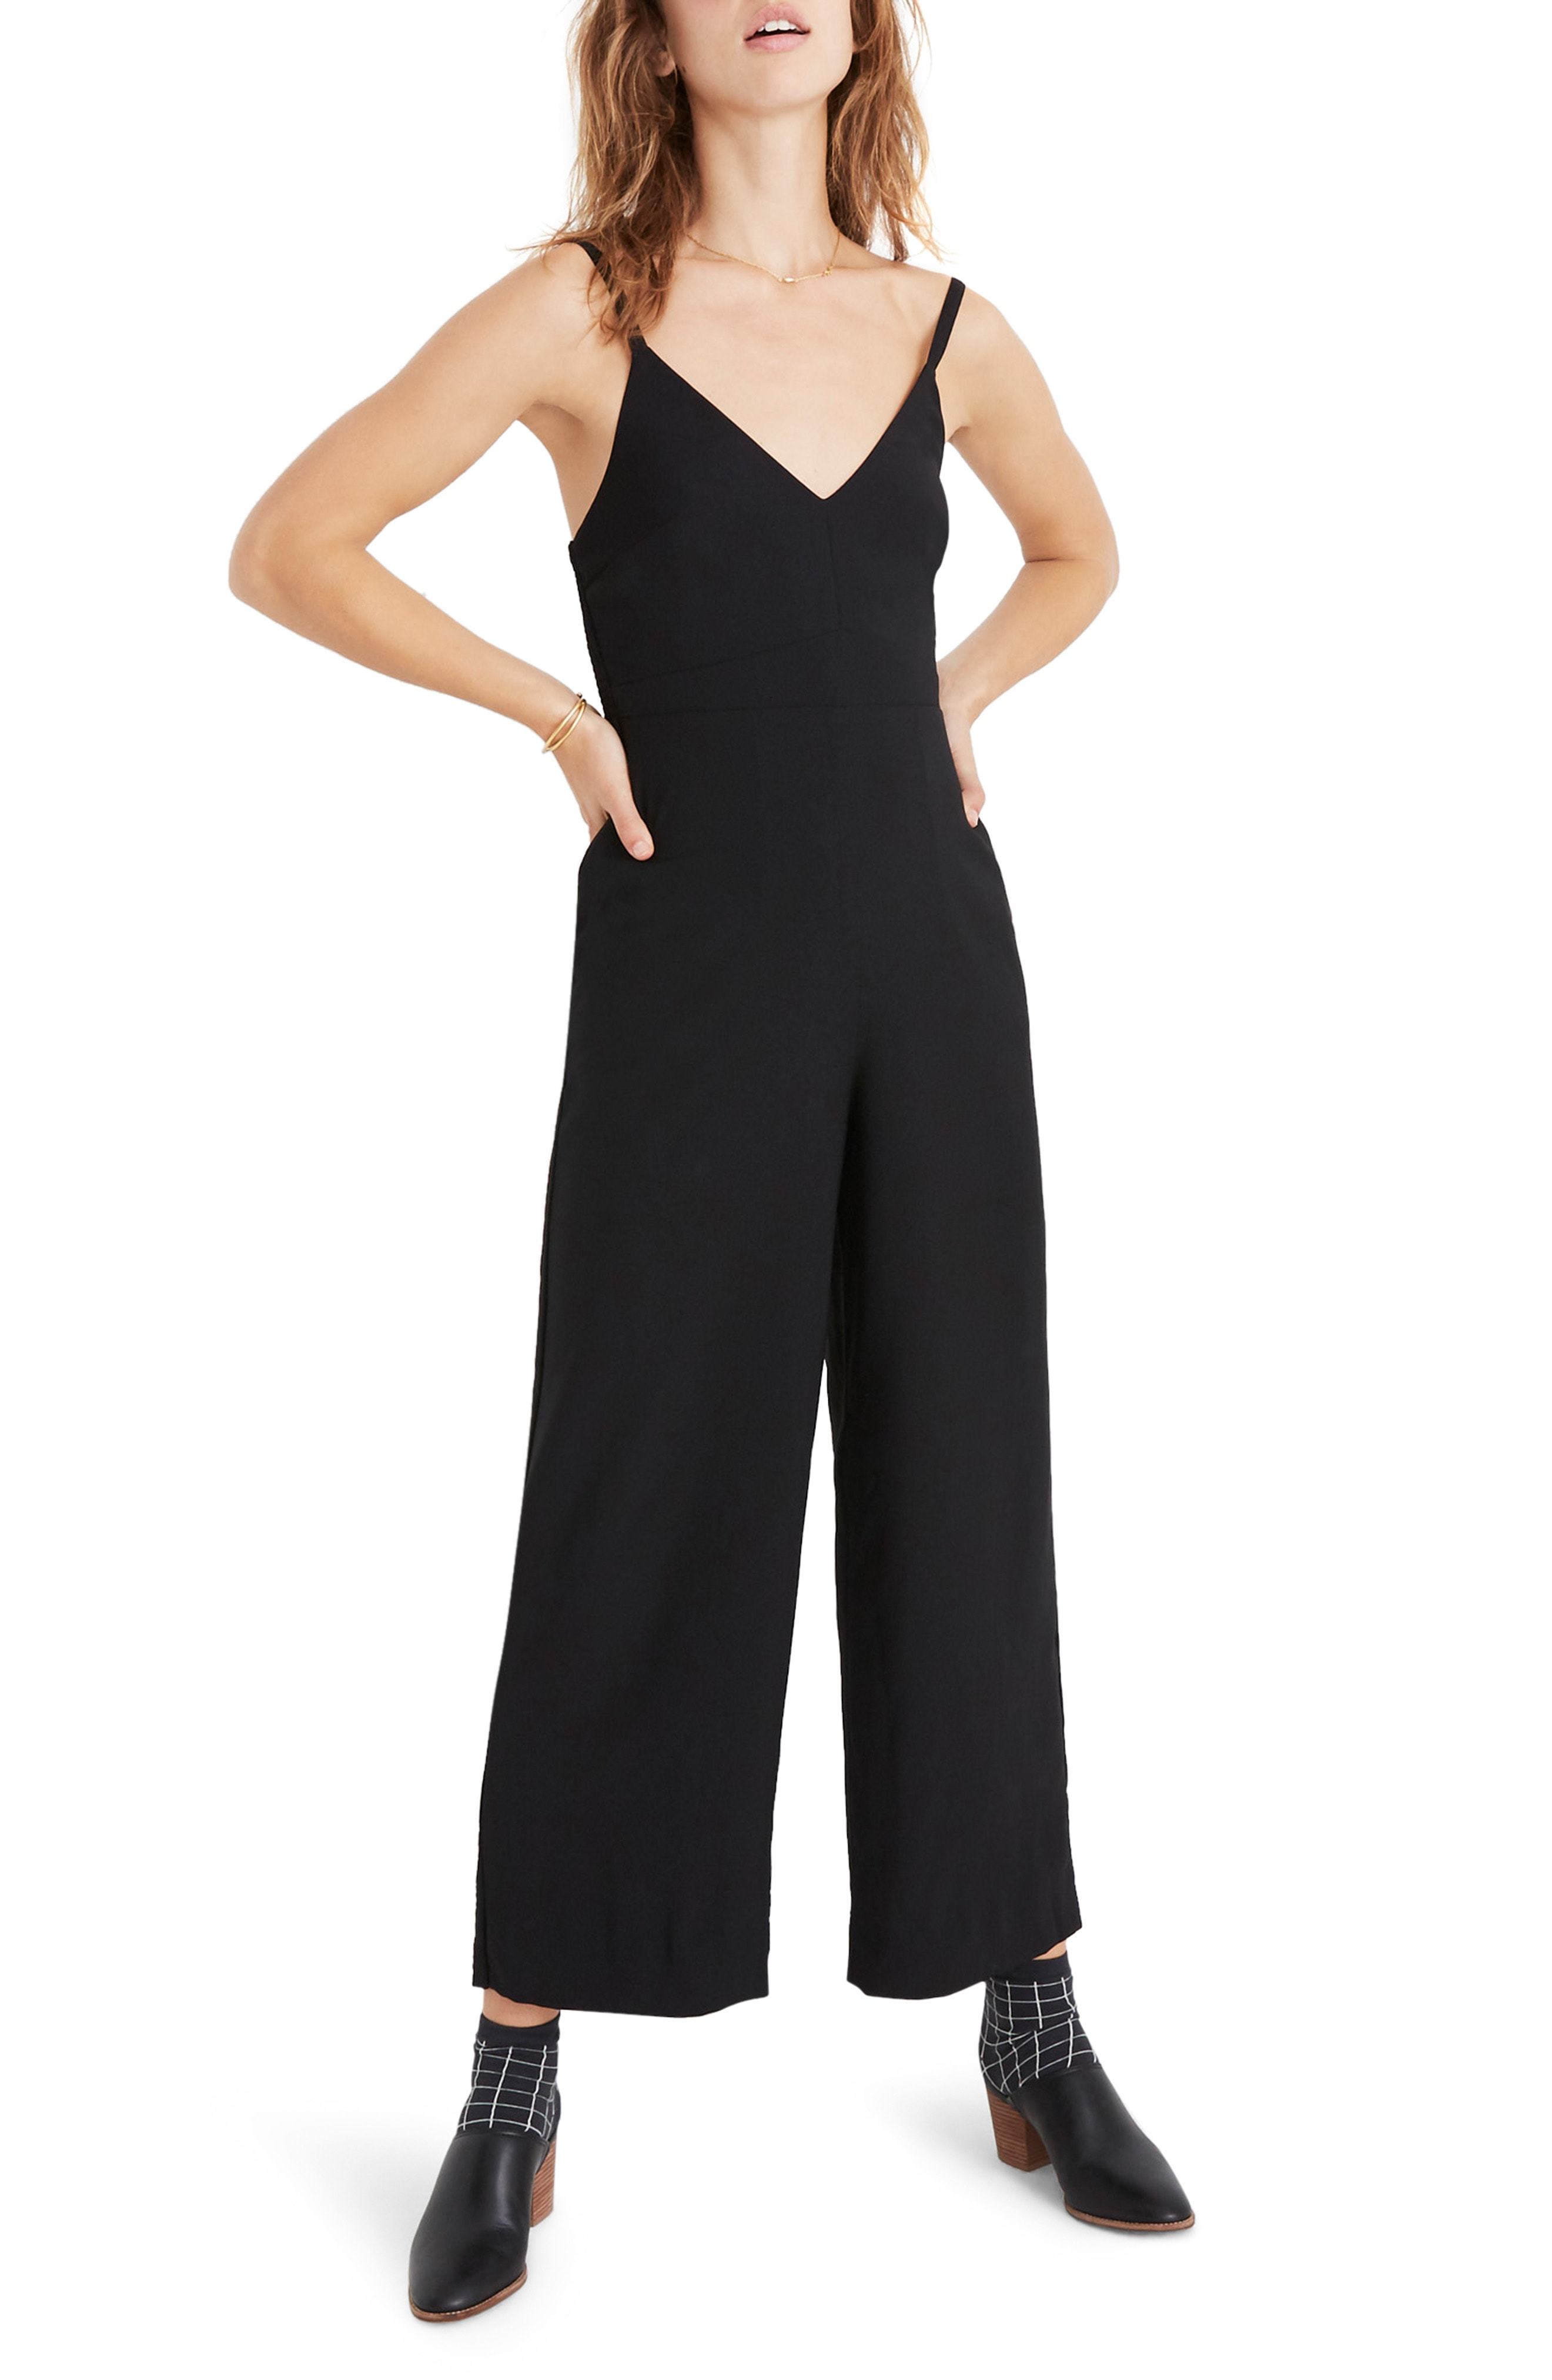 Madewell Thistle Camisole Jumpsuit, $82, Nordstrom